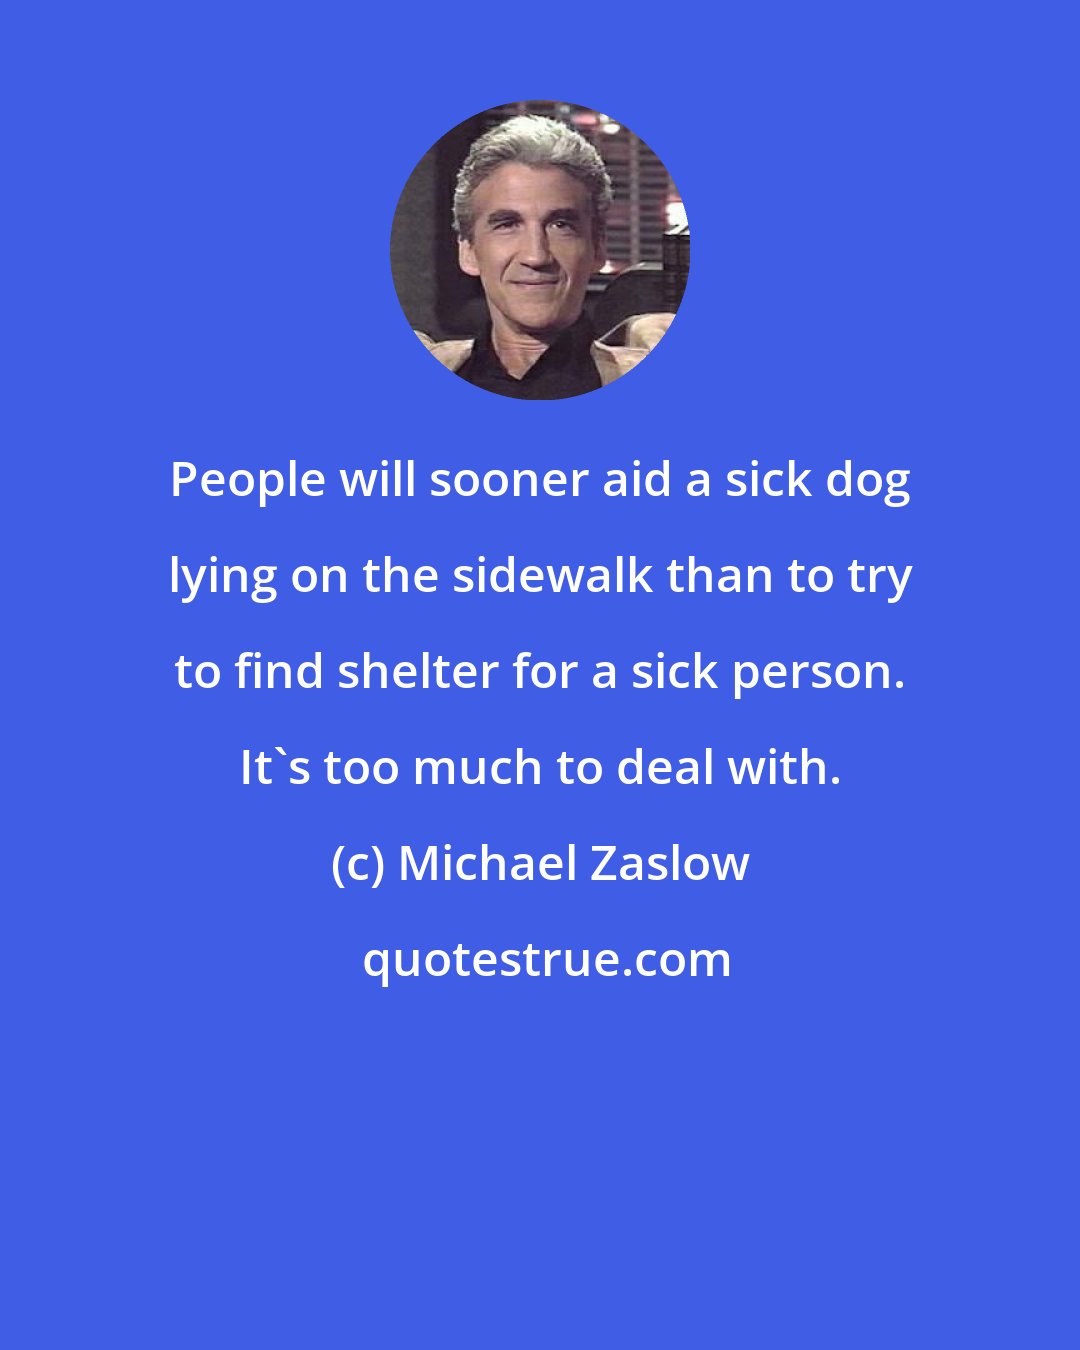 Michael Zaslow: People will sooner aid a sick dog lying on the sidewalk than to try to find shelter for a sick person. It's too much to deal with.